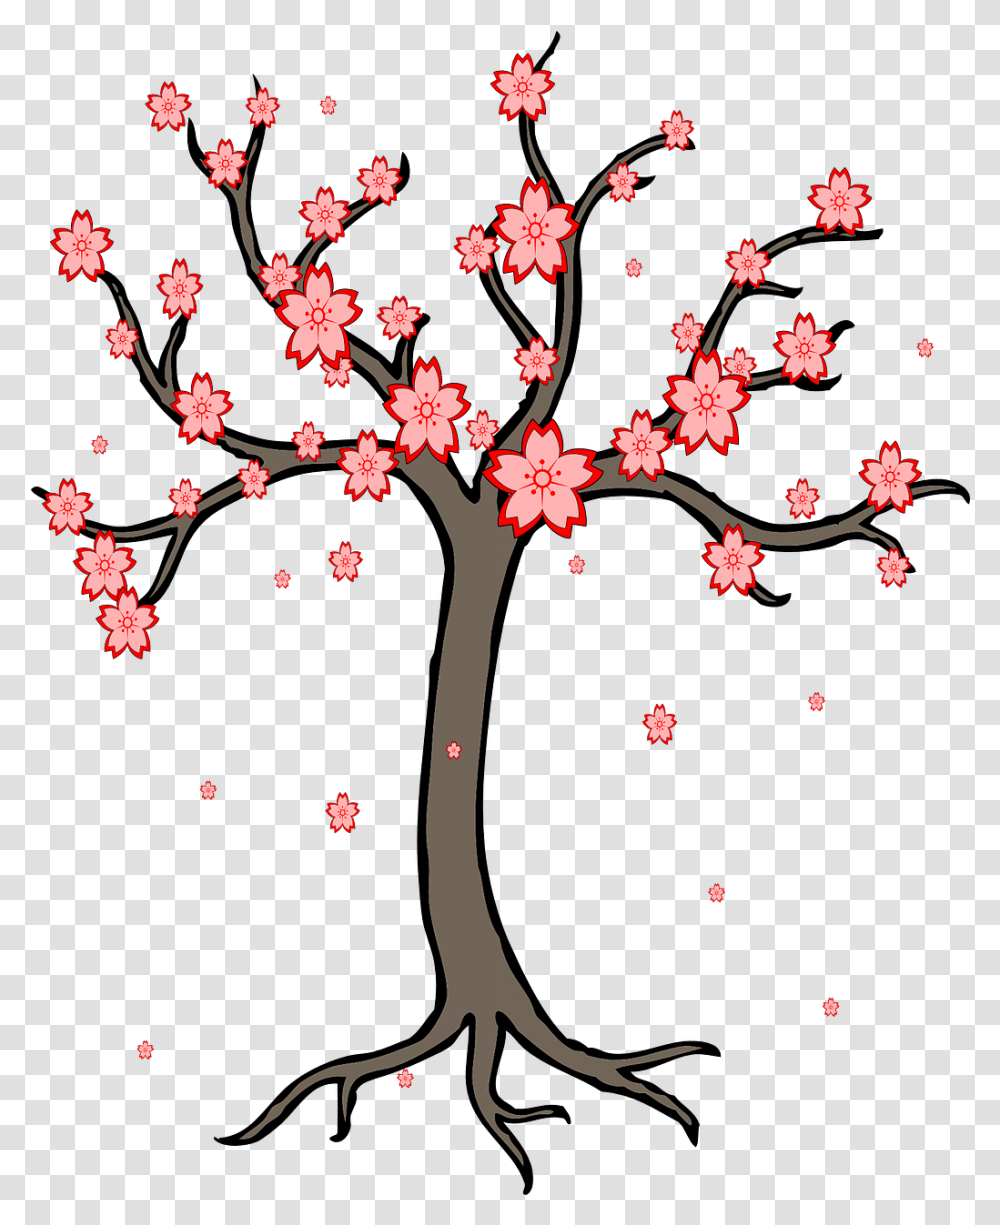 Cherry Blossom Tree Image Tree Trunk Clipart Black And White Tree Clipart, Plant, Flower Transparent Png